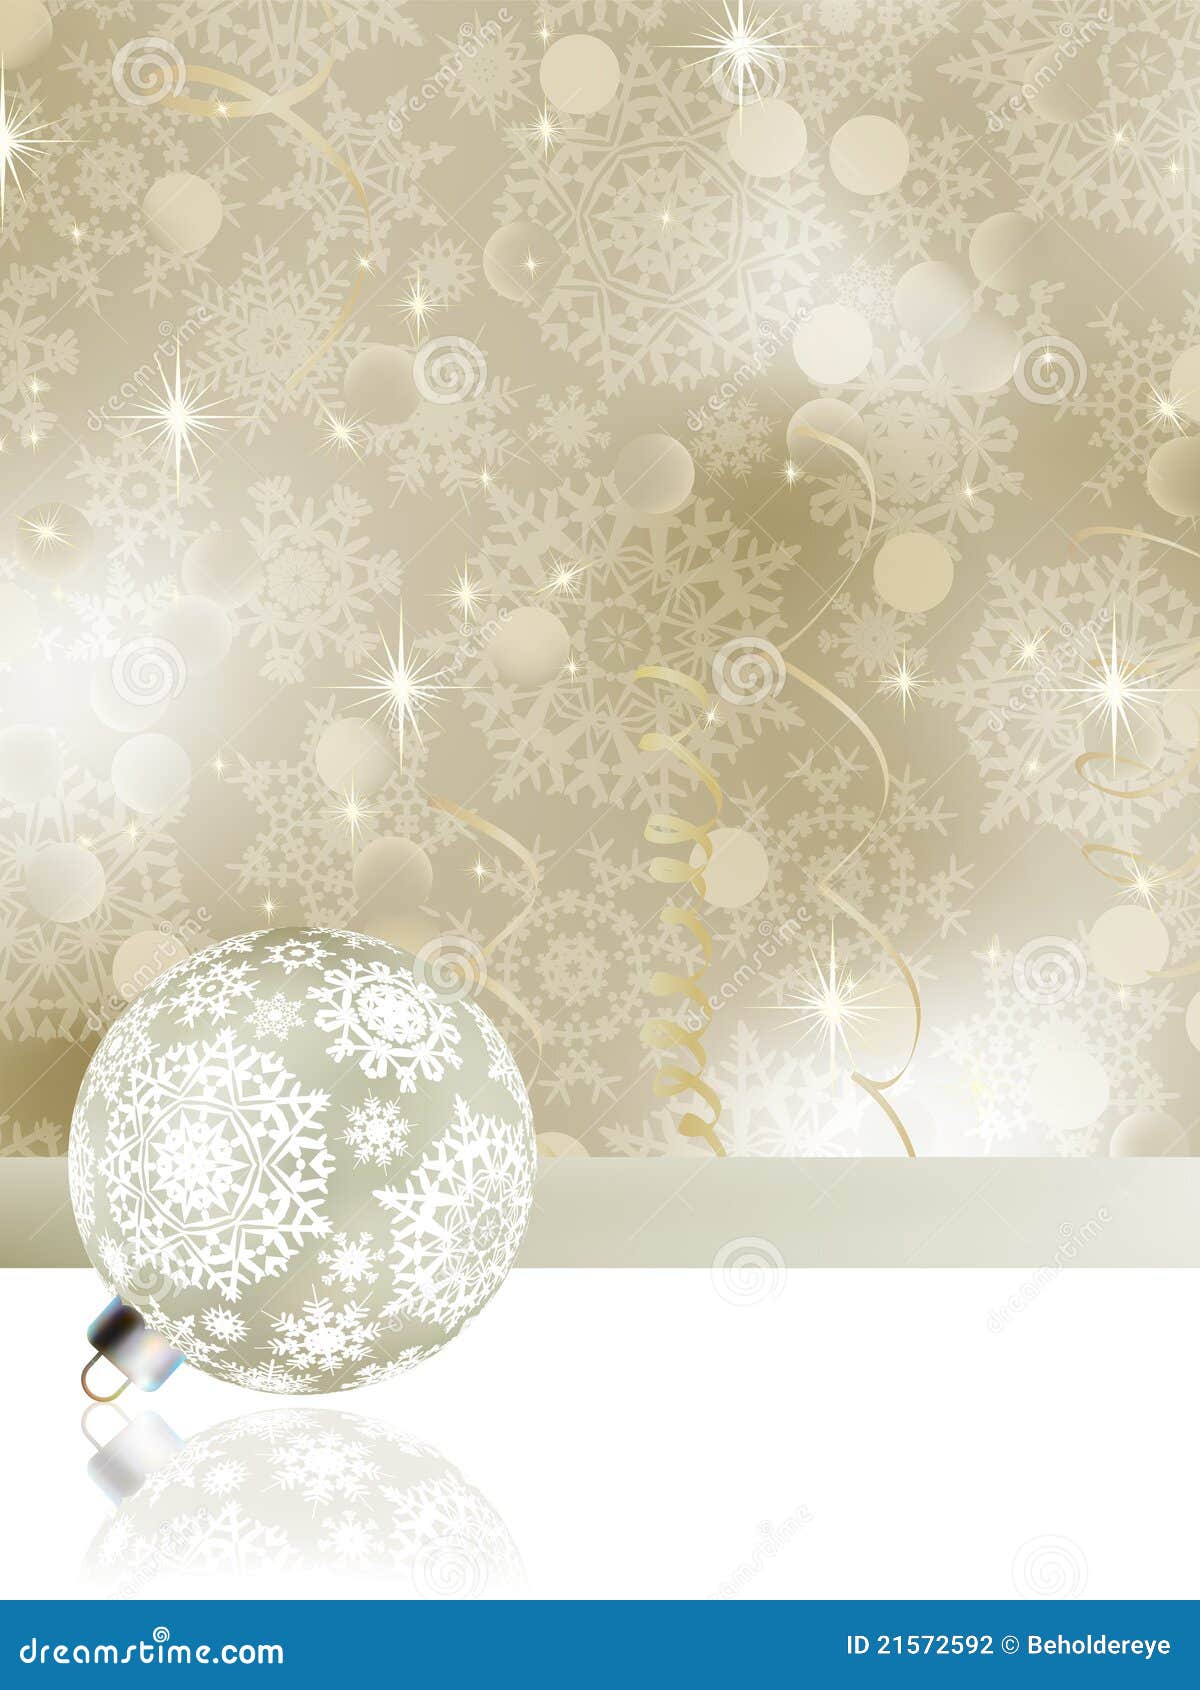 Elegant Christmas Background With Baubles. EPS 8 Stock 